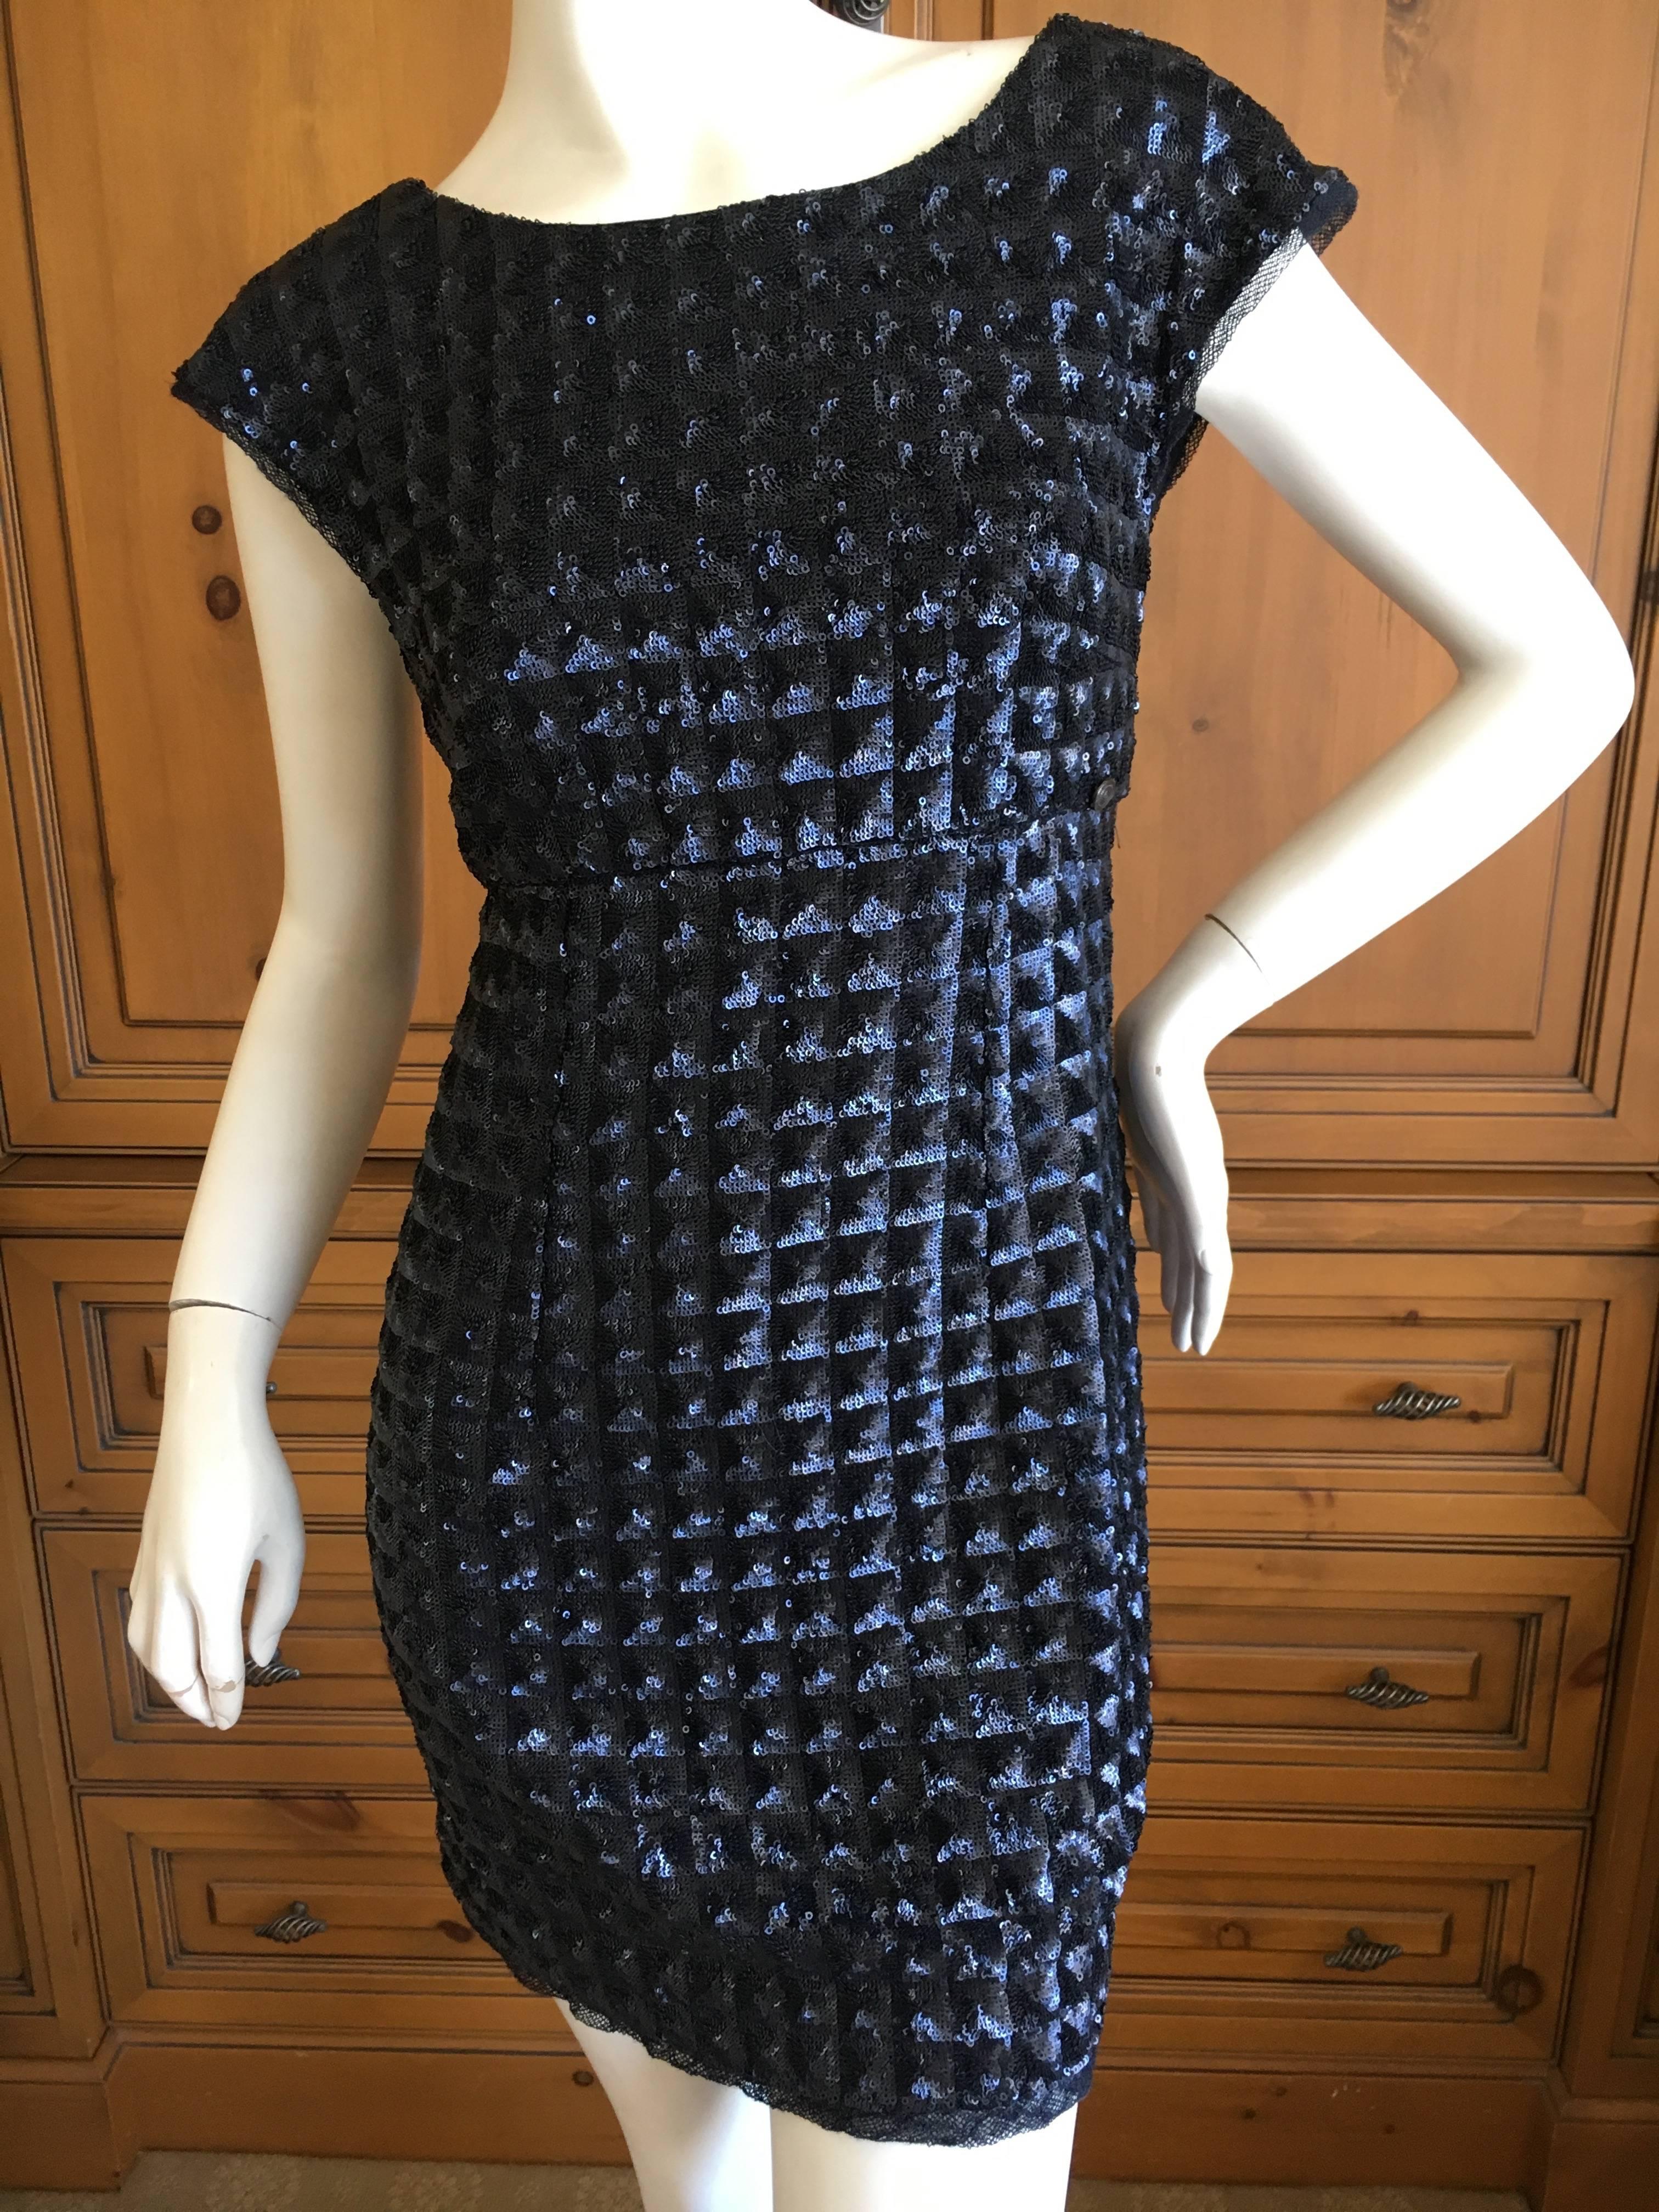 Chanel Vintage Navy Blue Sequin Quilted Mini Dress with Deep Vee Back In Excellent Condition For Sale In Cloverdale, CA